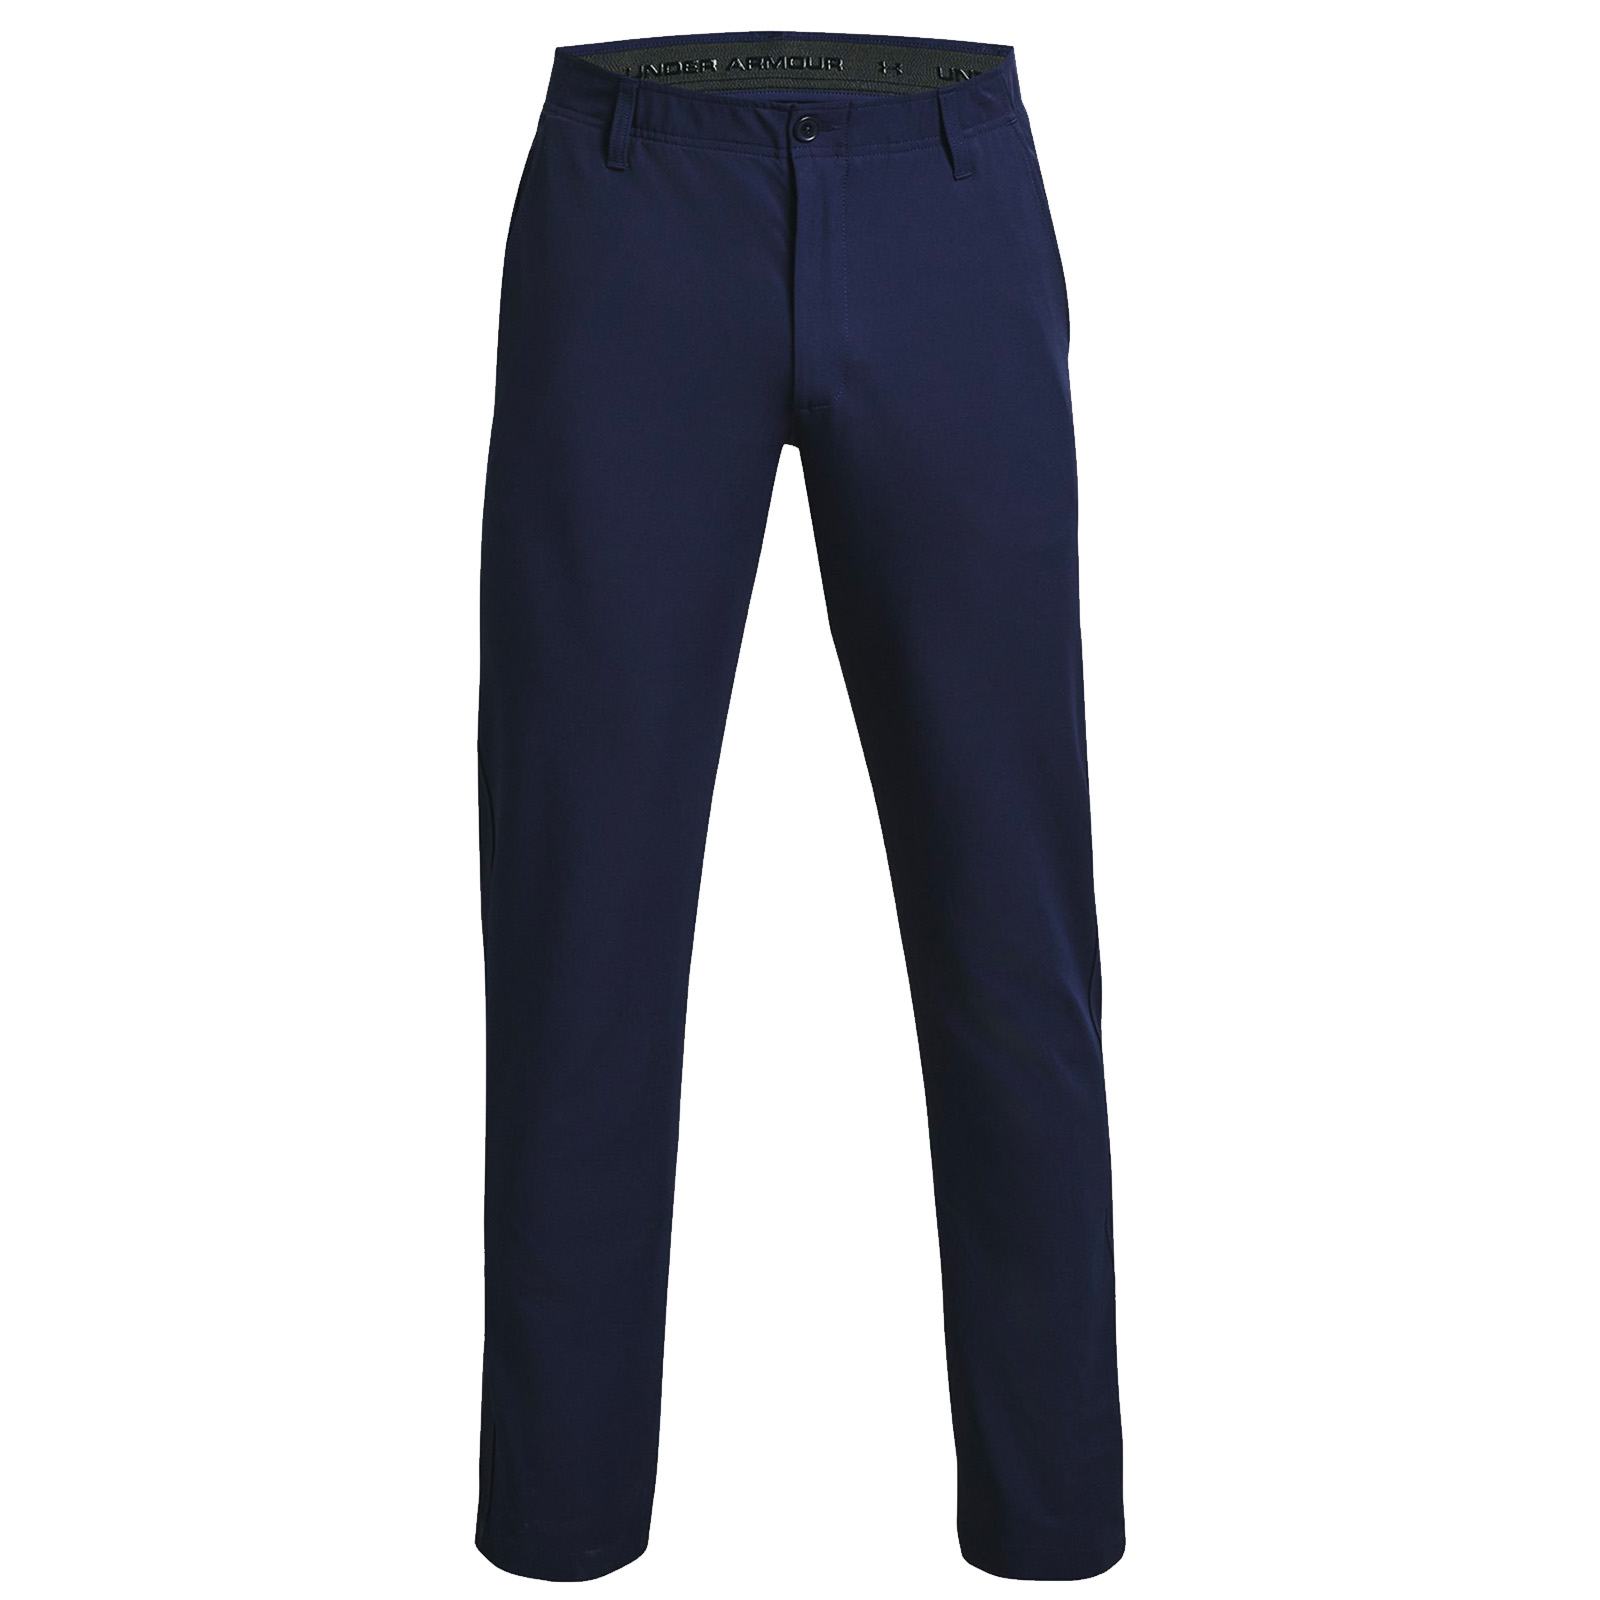 Under Armour Mens UA Drive Tapered Golf Trousers  - Midnight Navy